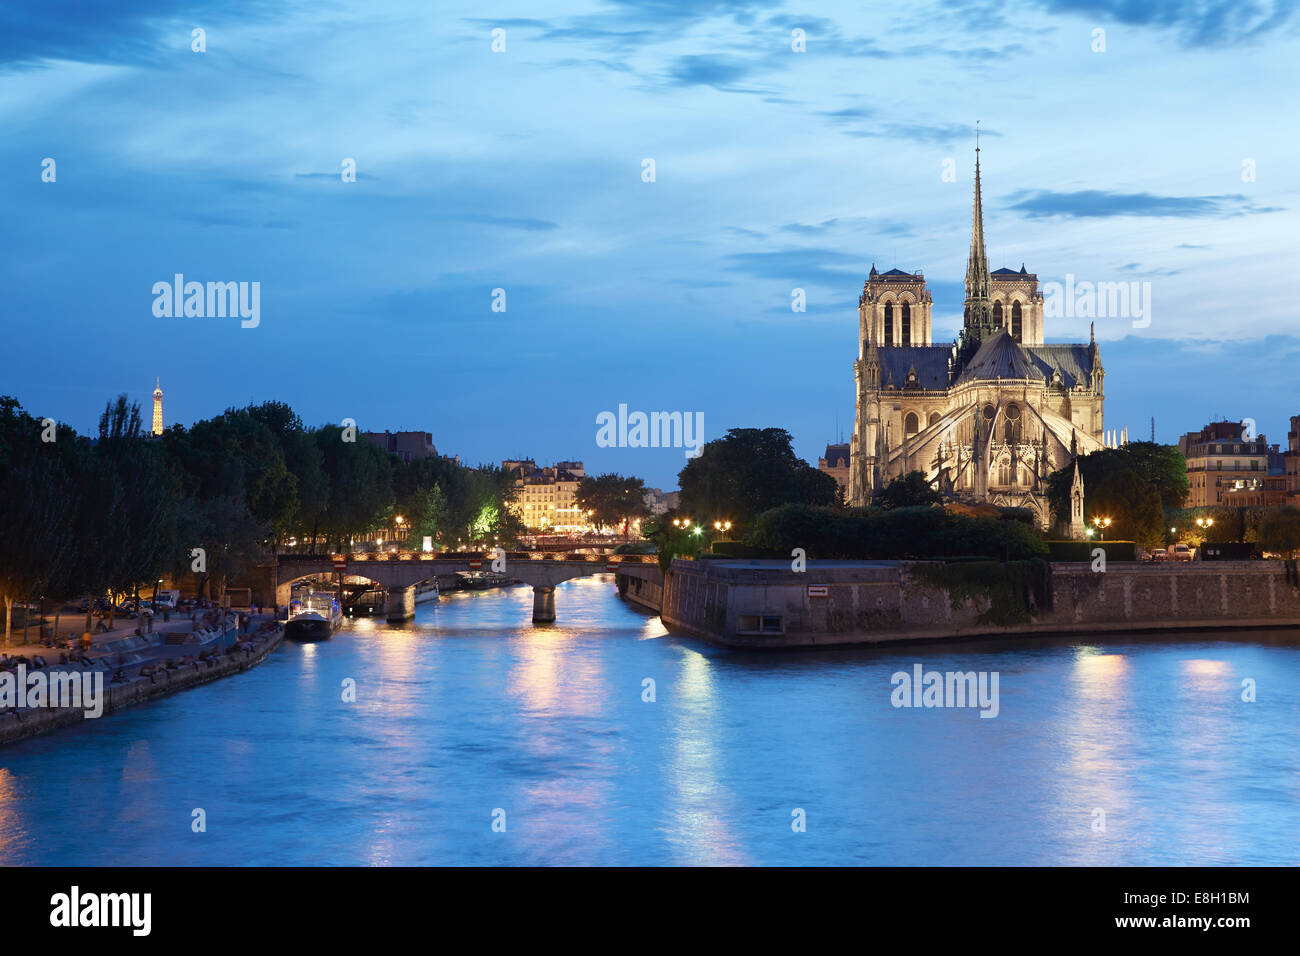 The Cathedral of Notre Dame, Paris at night with Seine river view Stock Photo